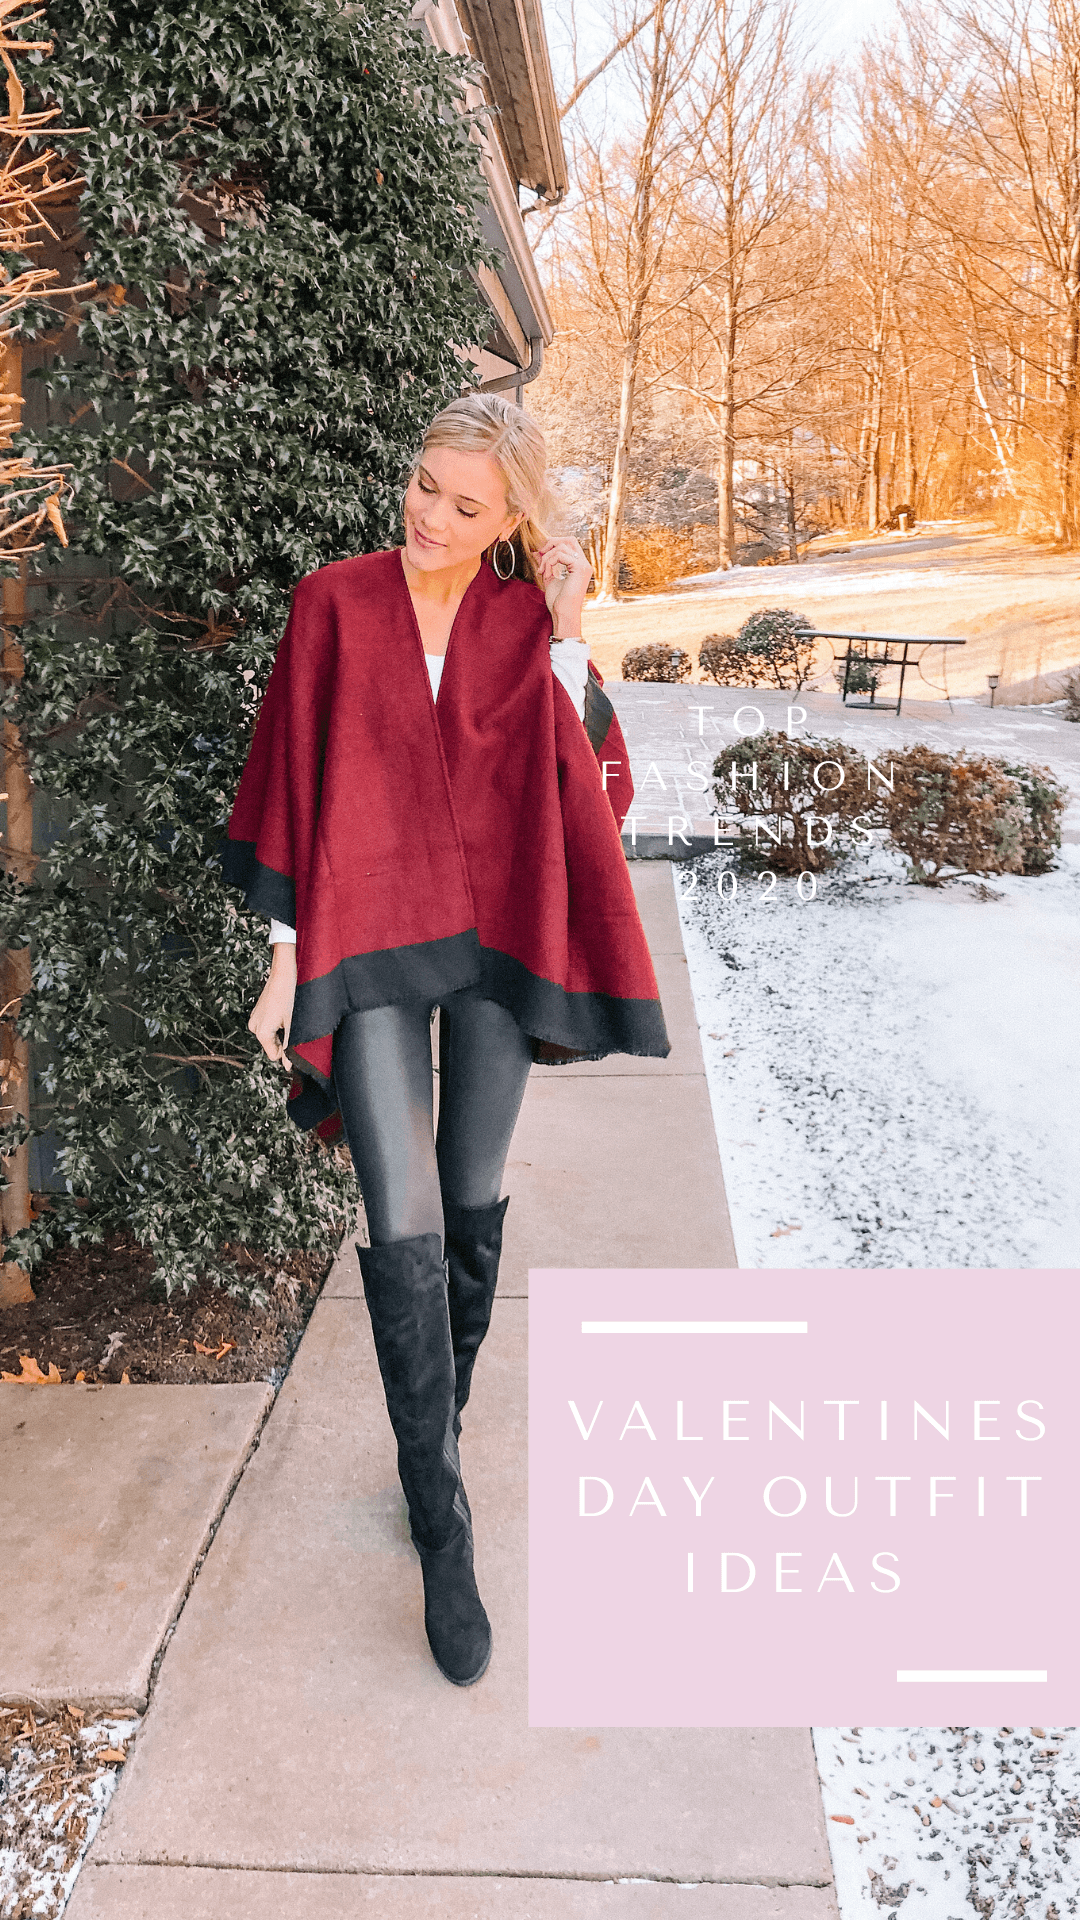 13 Valentines Outfit Ideas Casual + Dressy Options 2020 byalainanicole